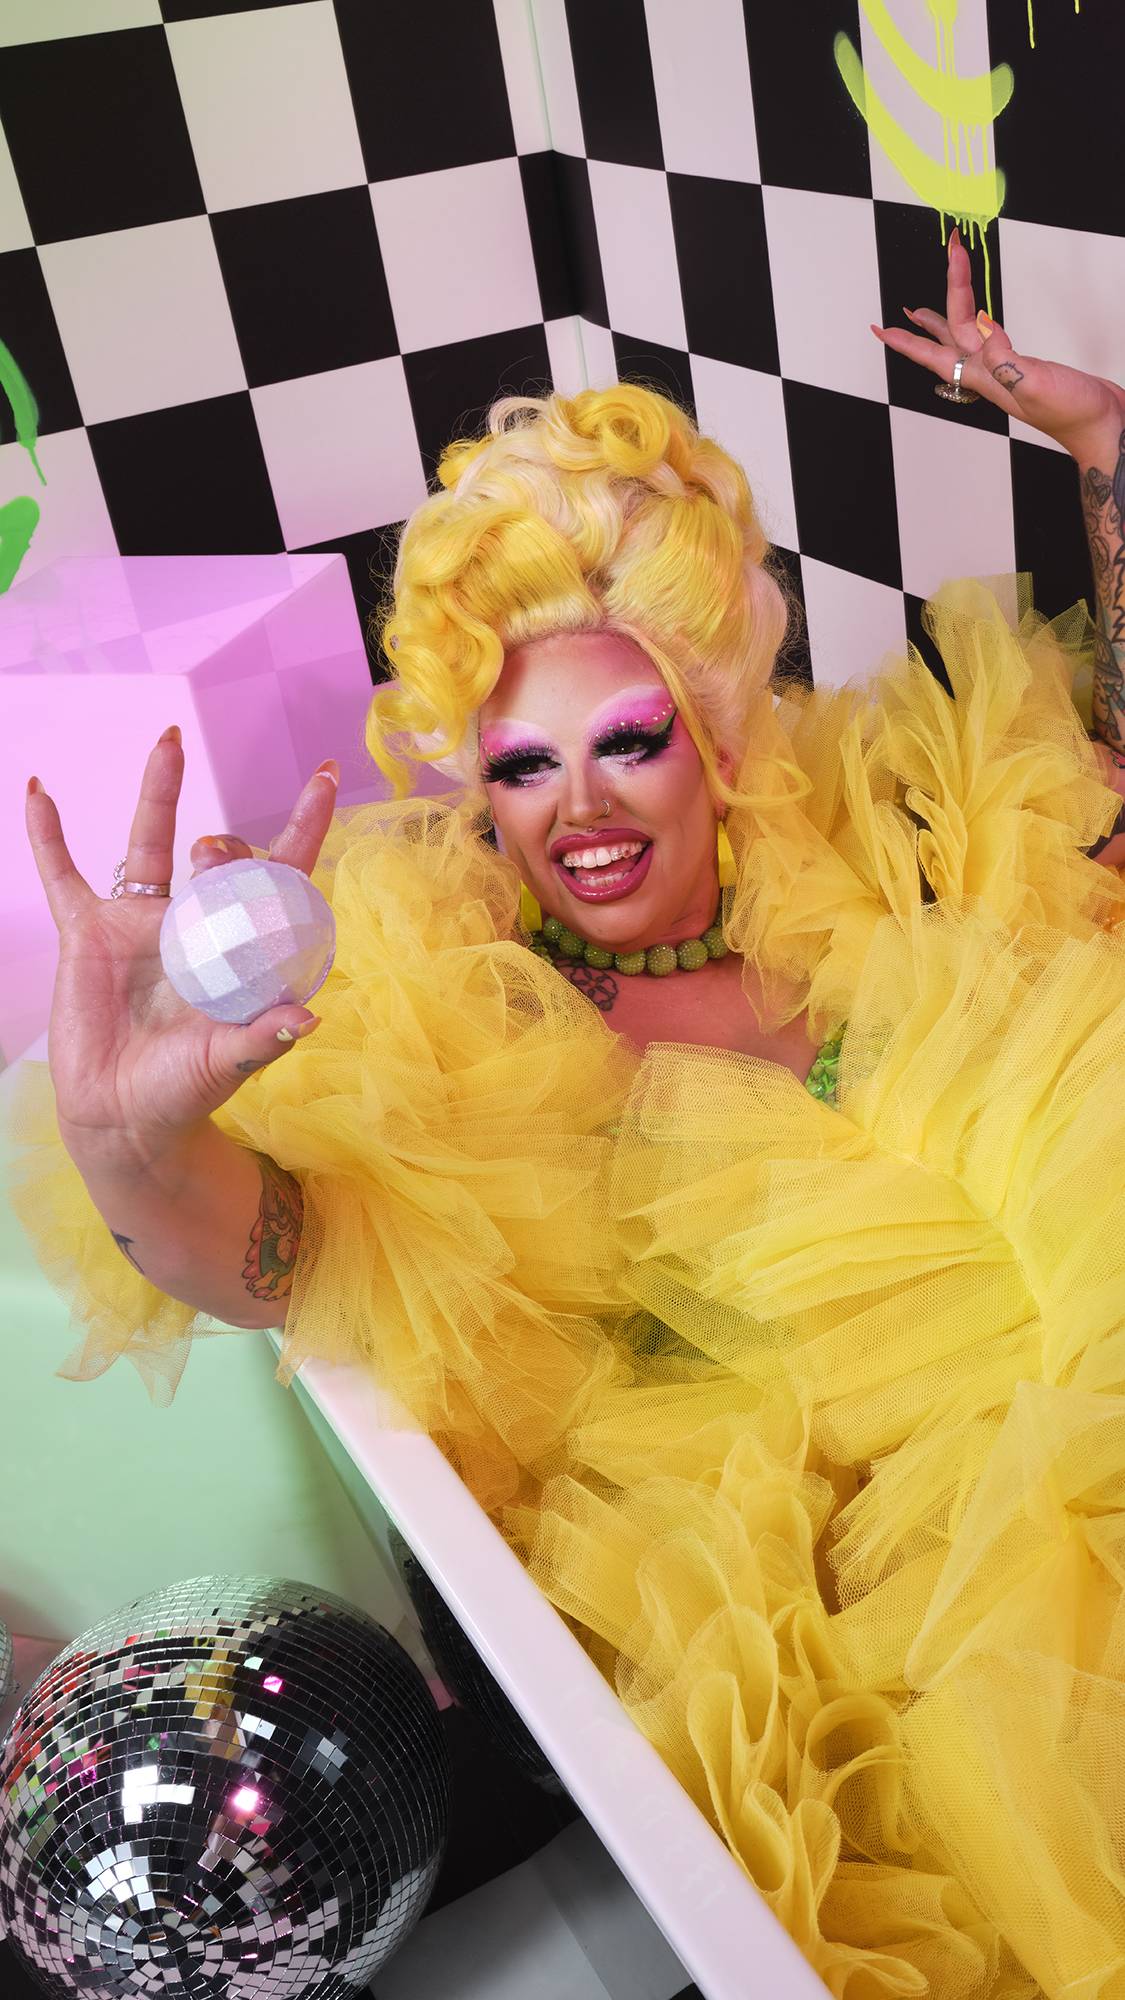 Model is wearing a yellow dress in the bathtub. They are smiling as they hold the bath bomb on checkered and neon background.